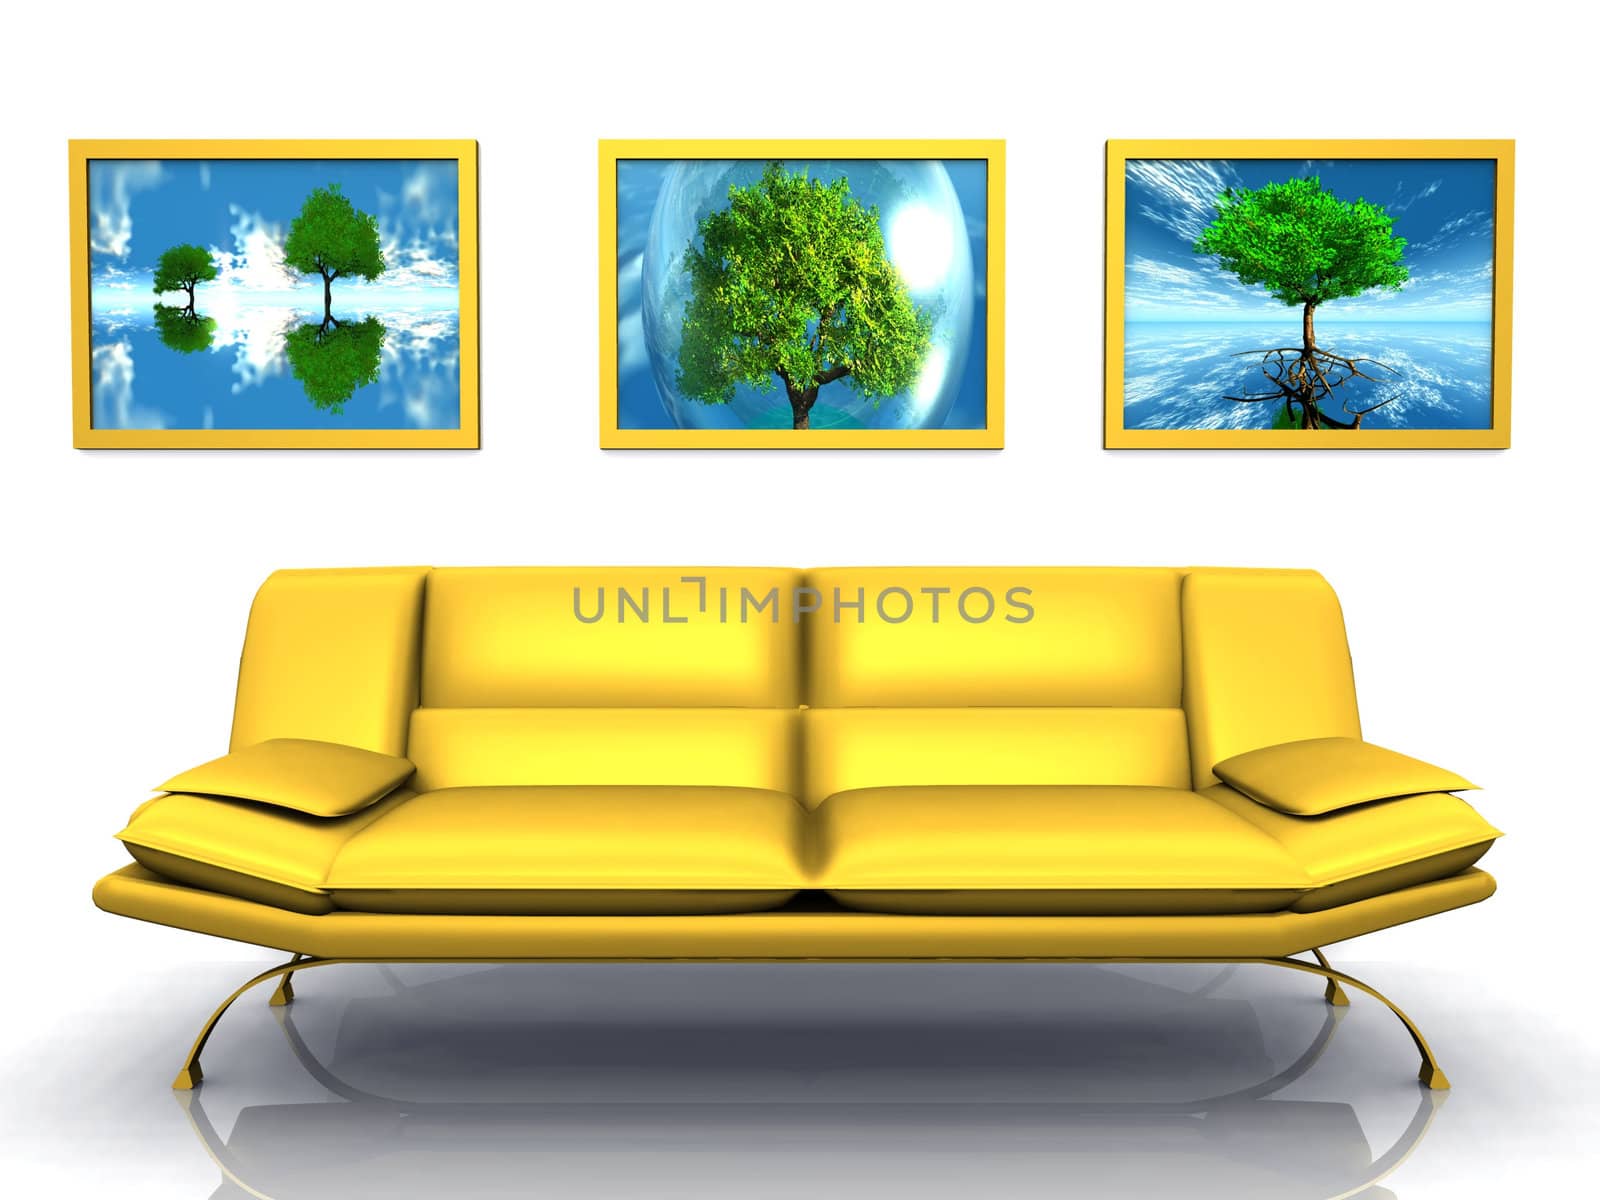 the yellow sofa and the tree frame by njaj